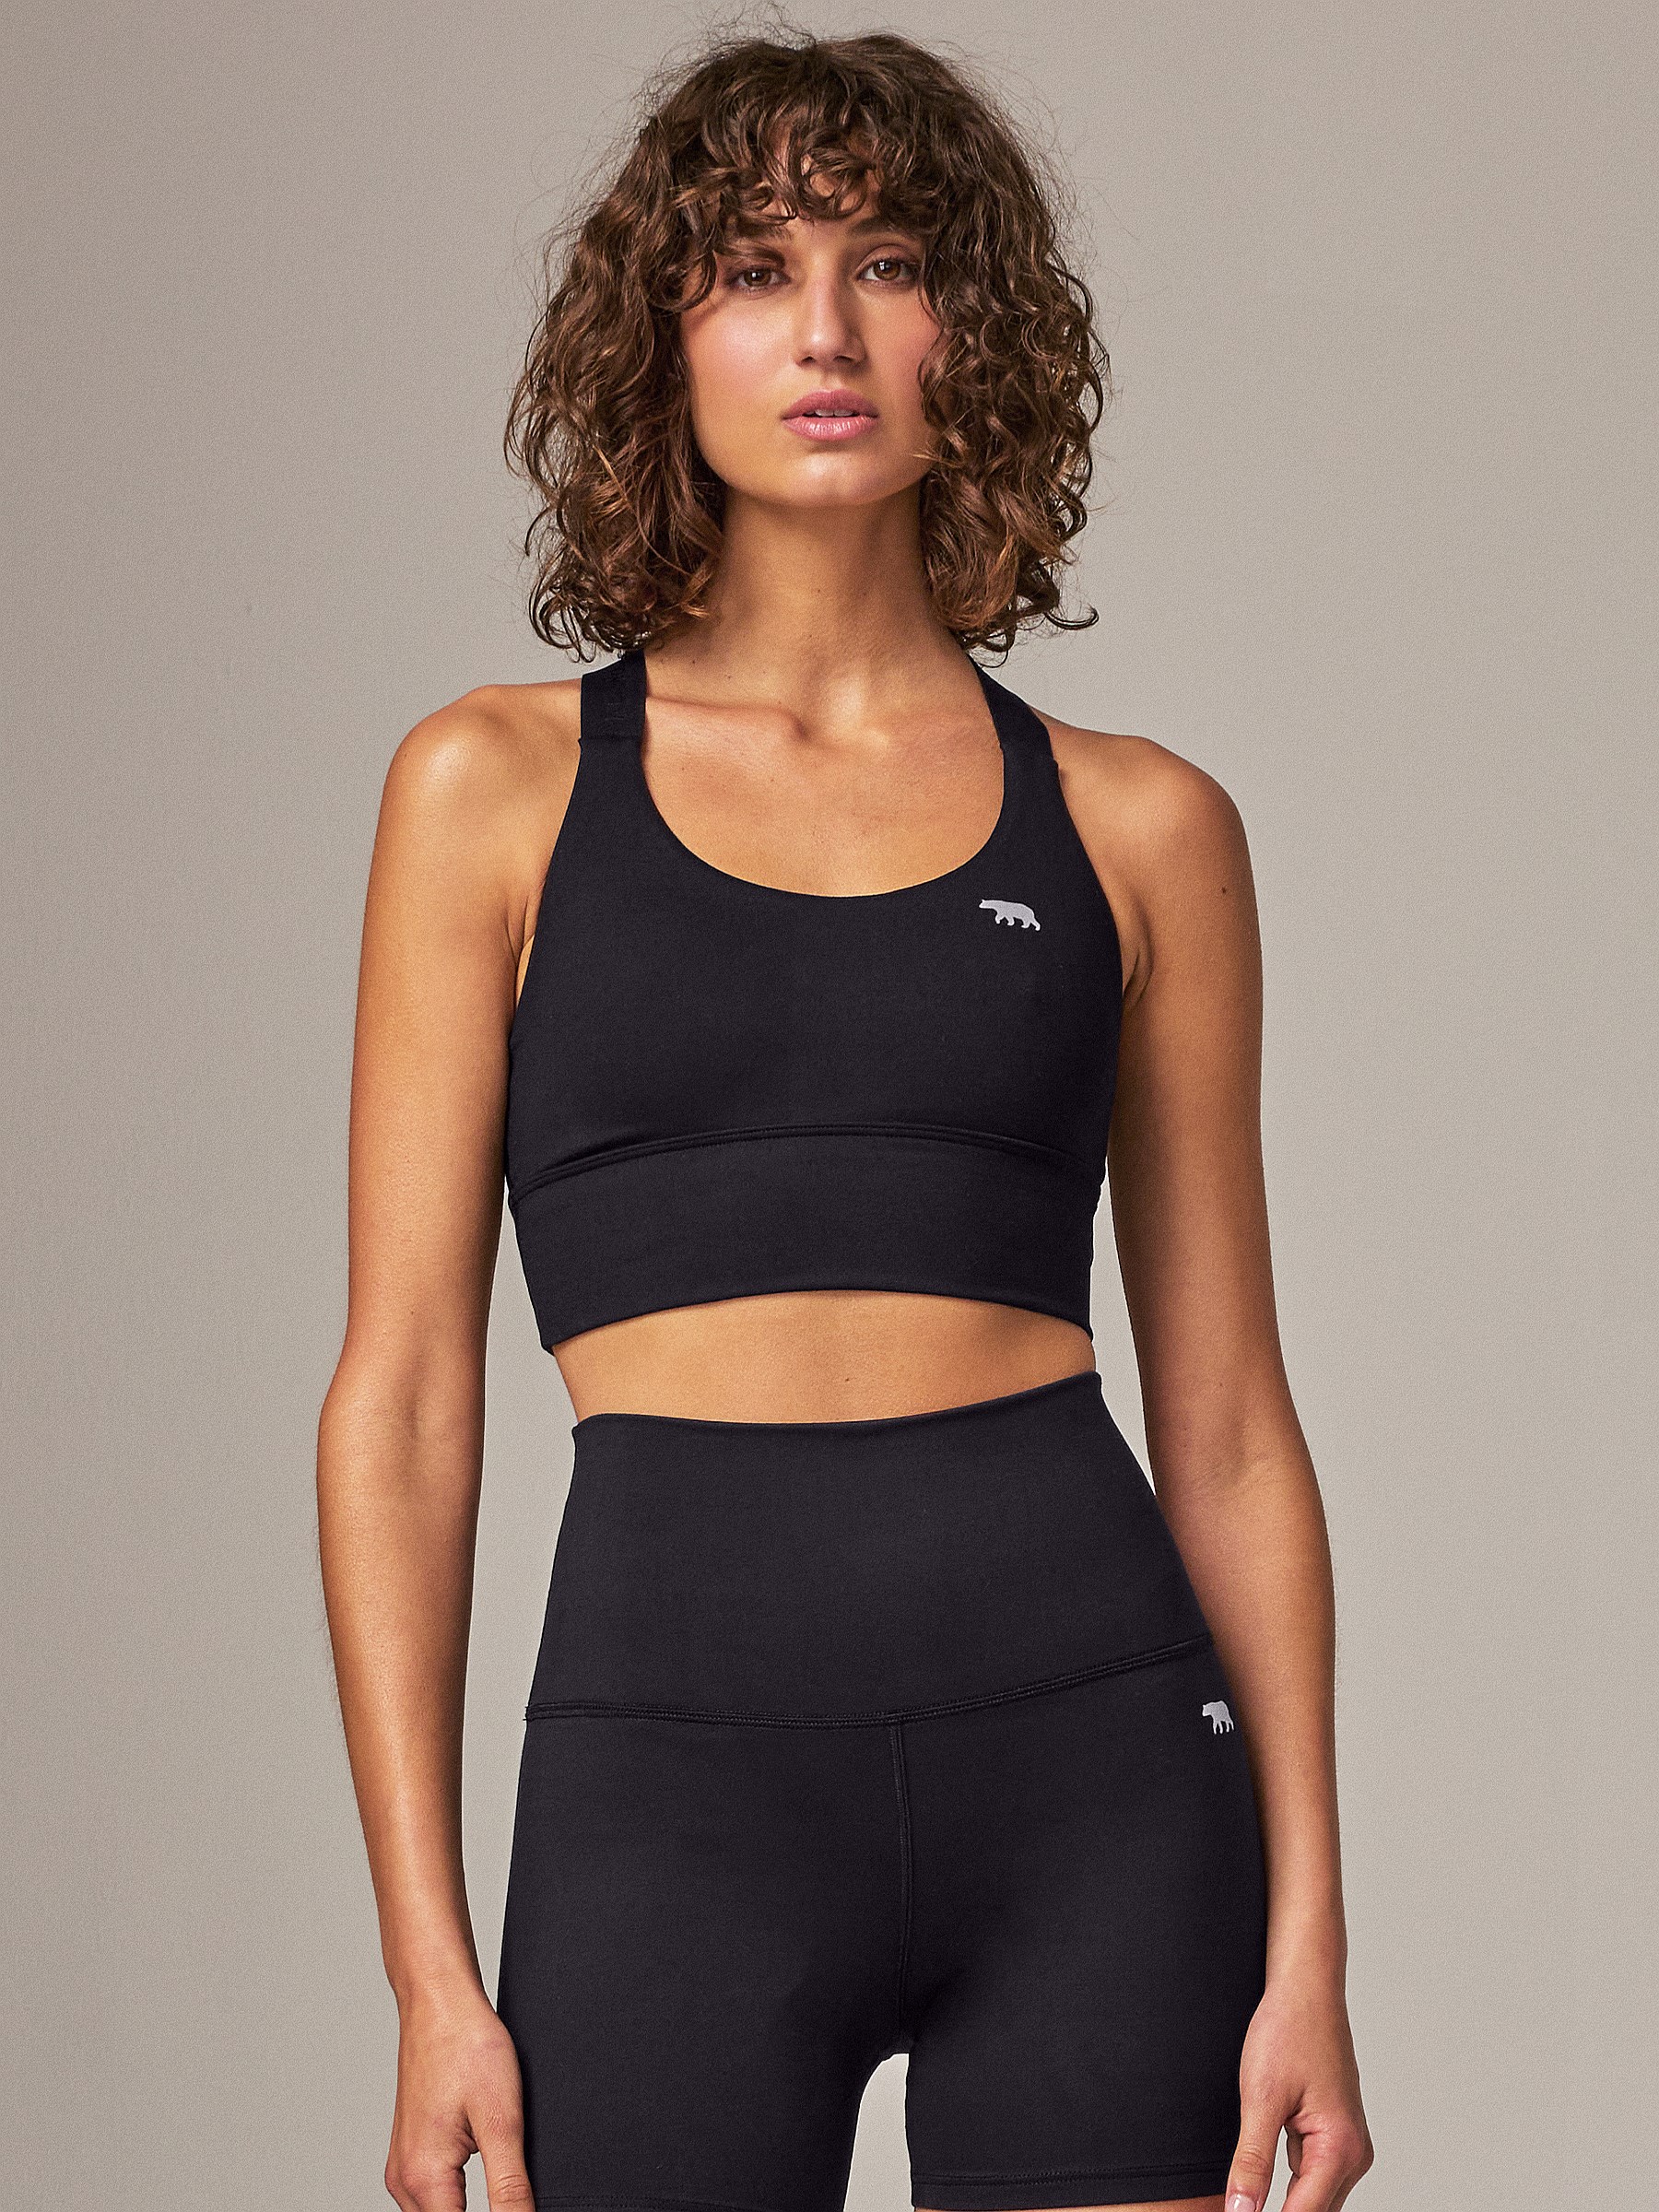 Running Bare Made to Move Sports Bra- Black. Women's Workout Tops